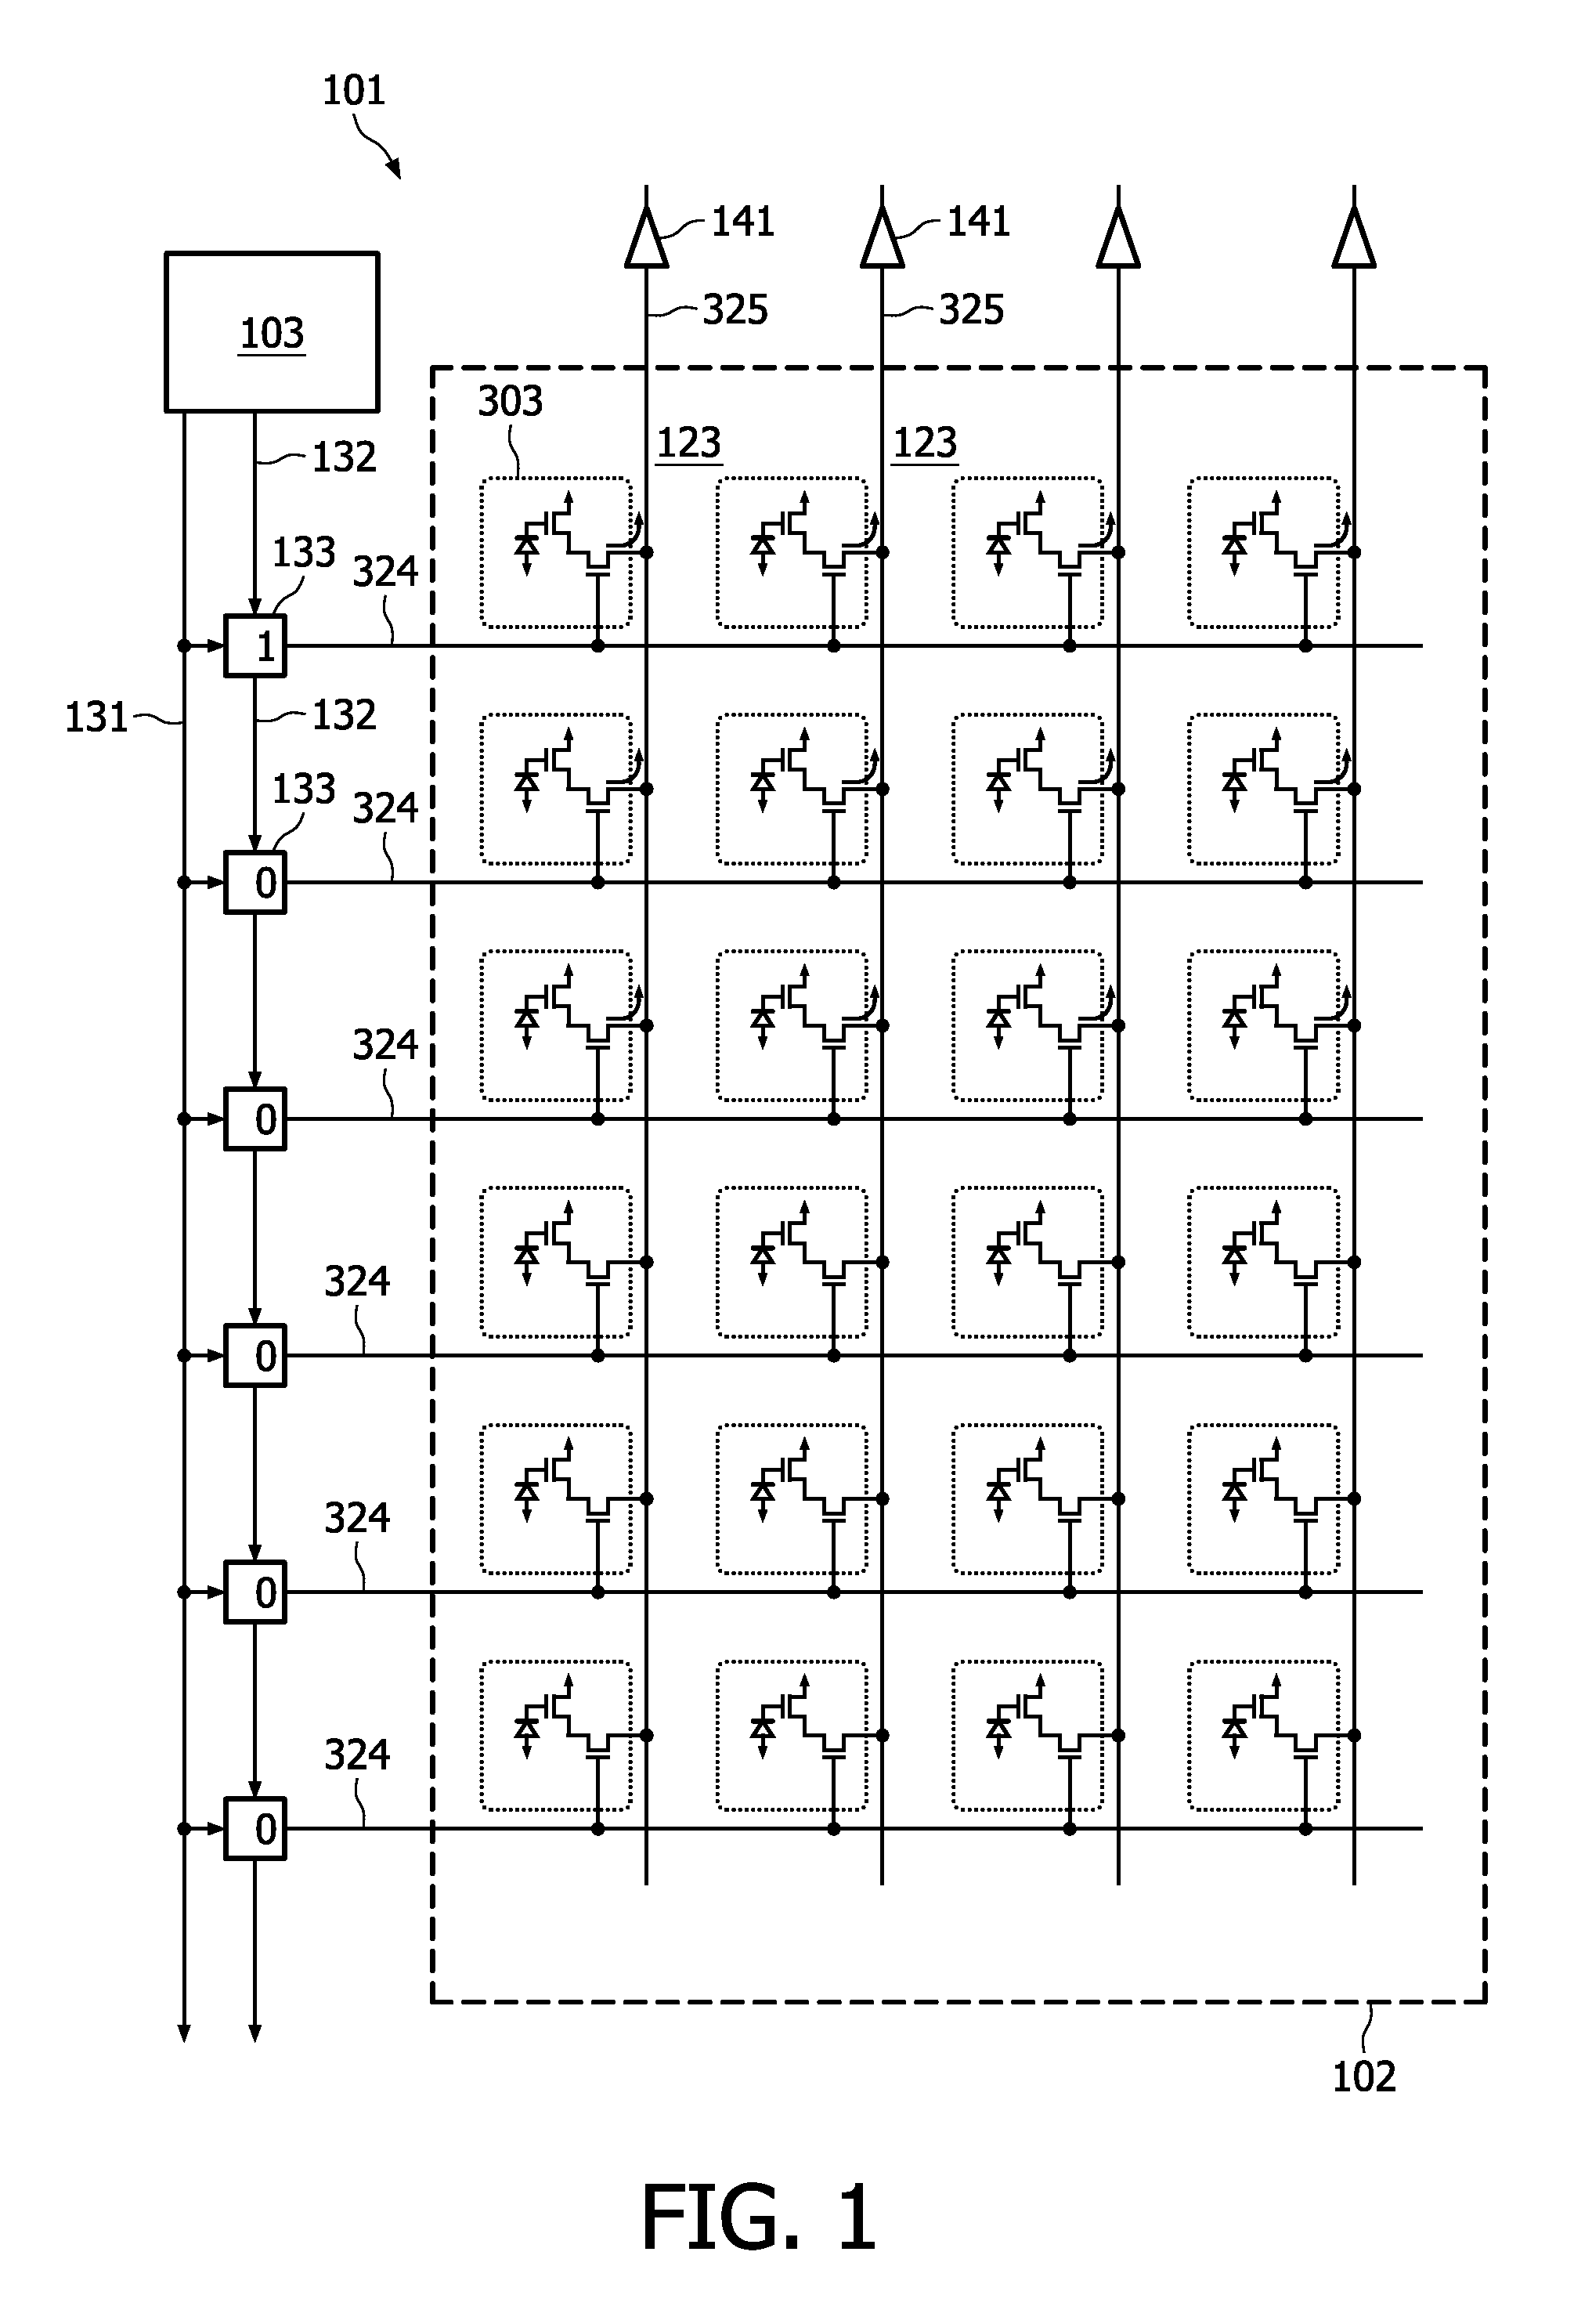 Suppression of direct detection events in X-ray detectors